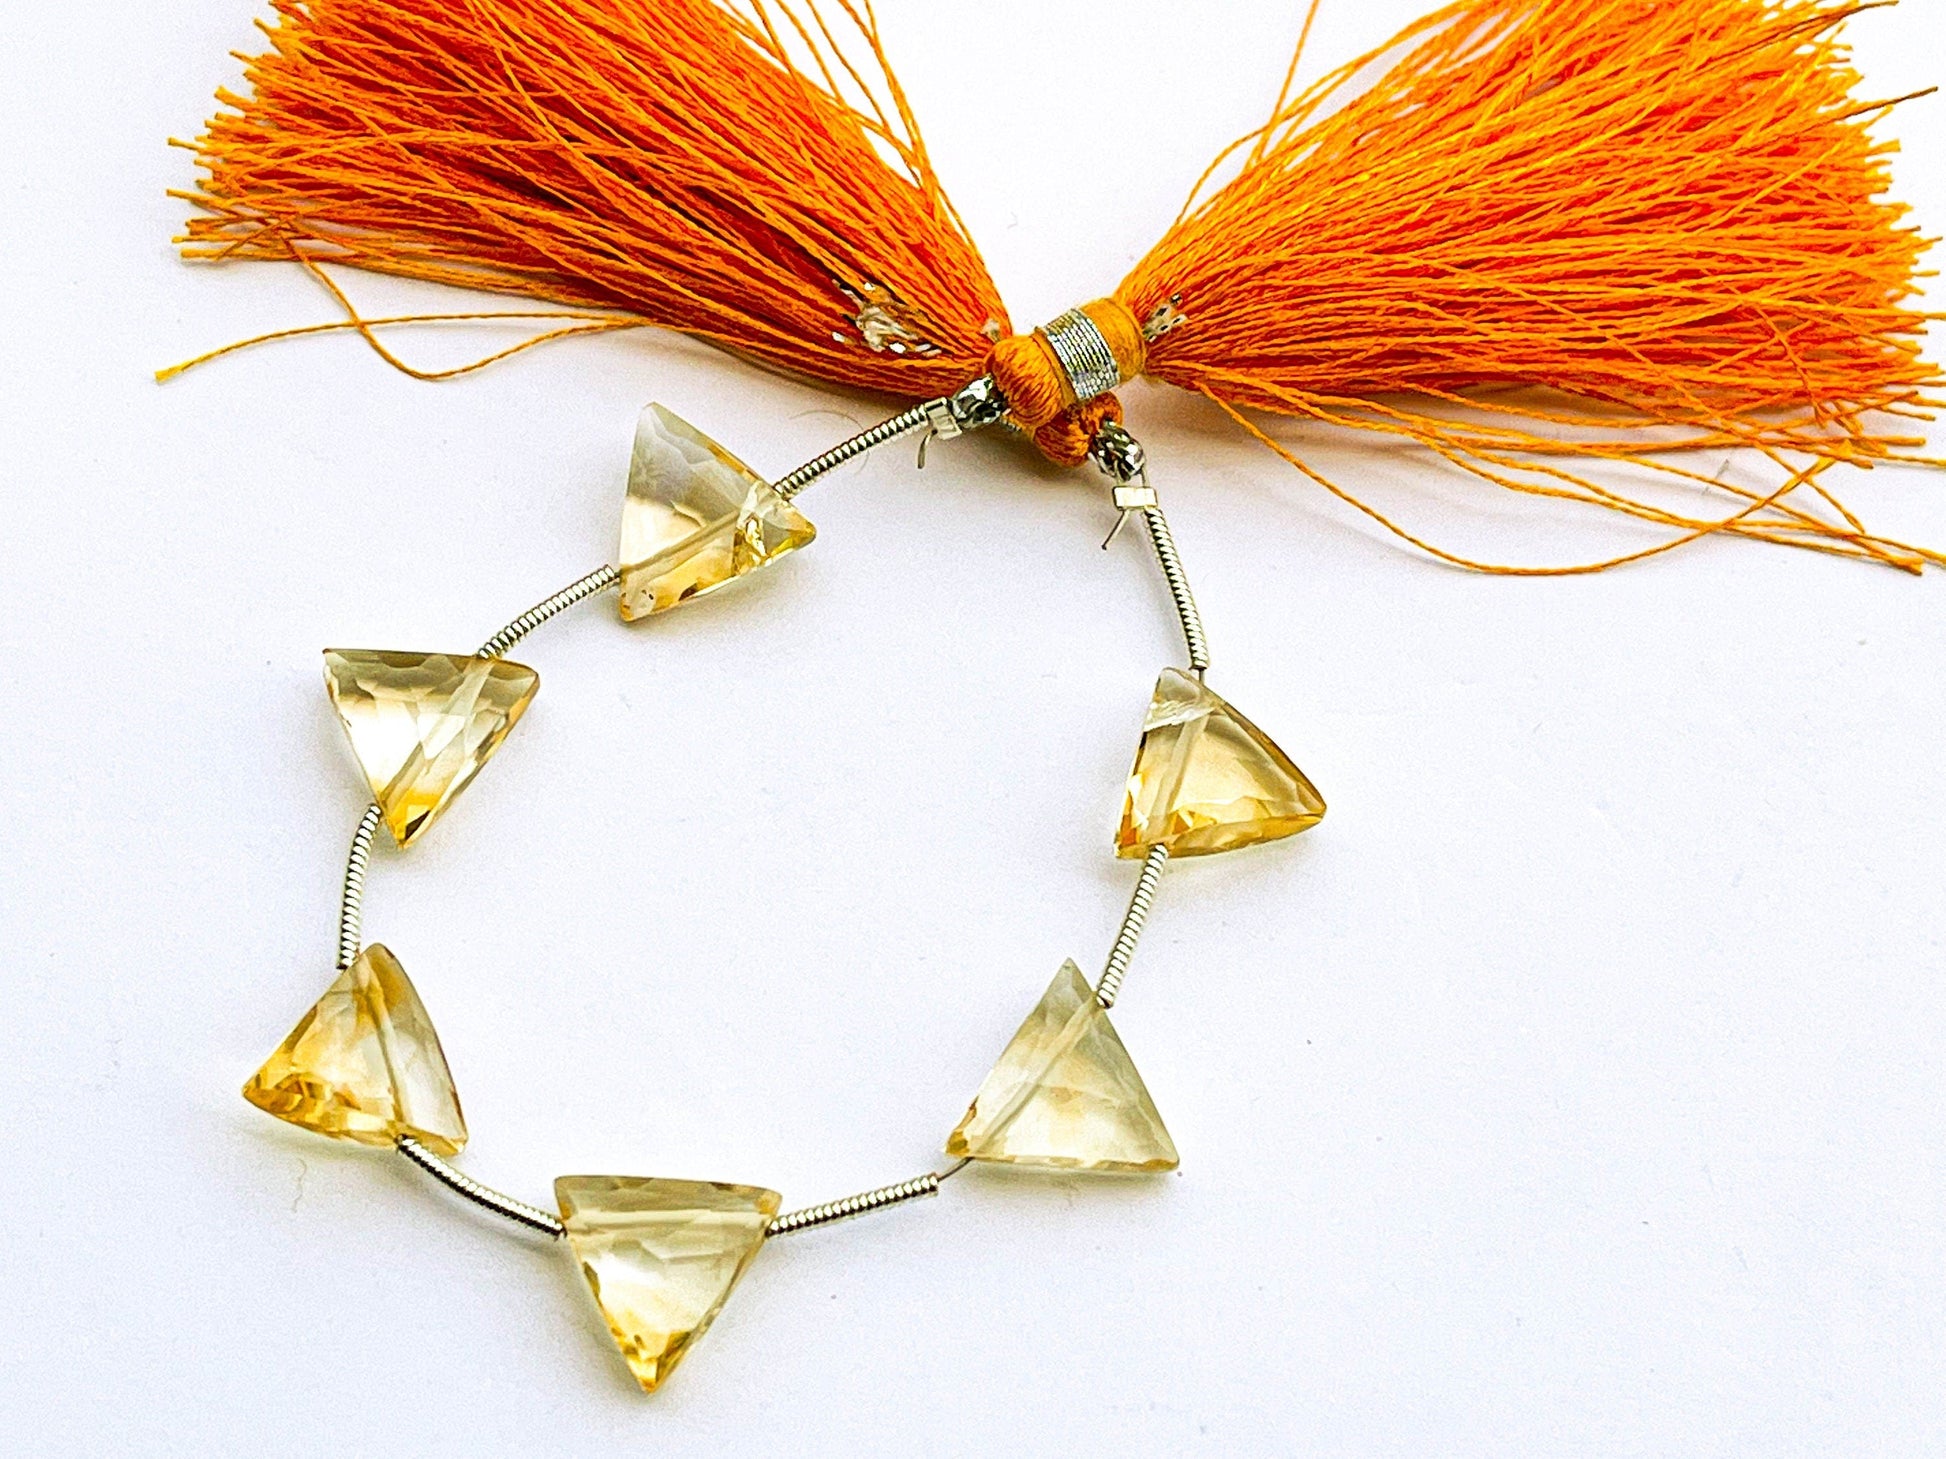 6 pieces CITRINE Triangle Shape Faceted Briolette Beads, Natural Citrine Gemstone Beads, Citrine Briolette, 10x10mm Beadsforyourjewelry